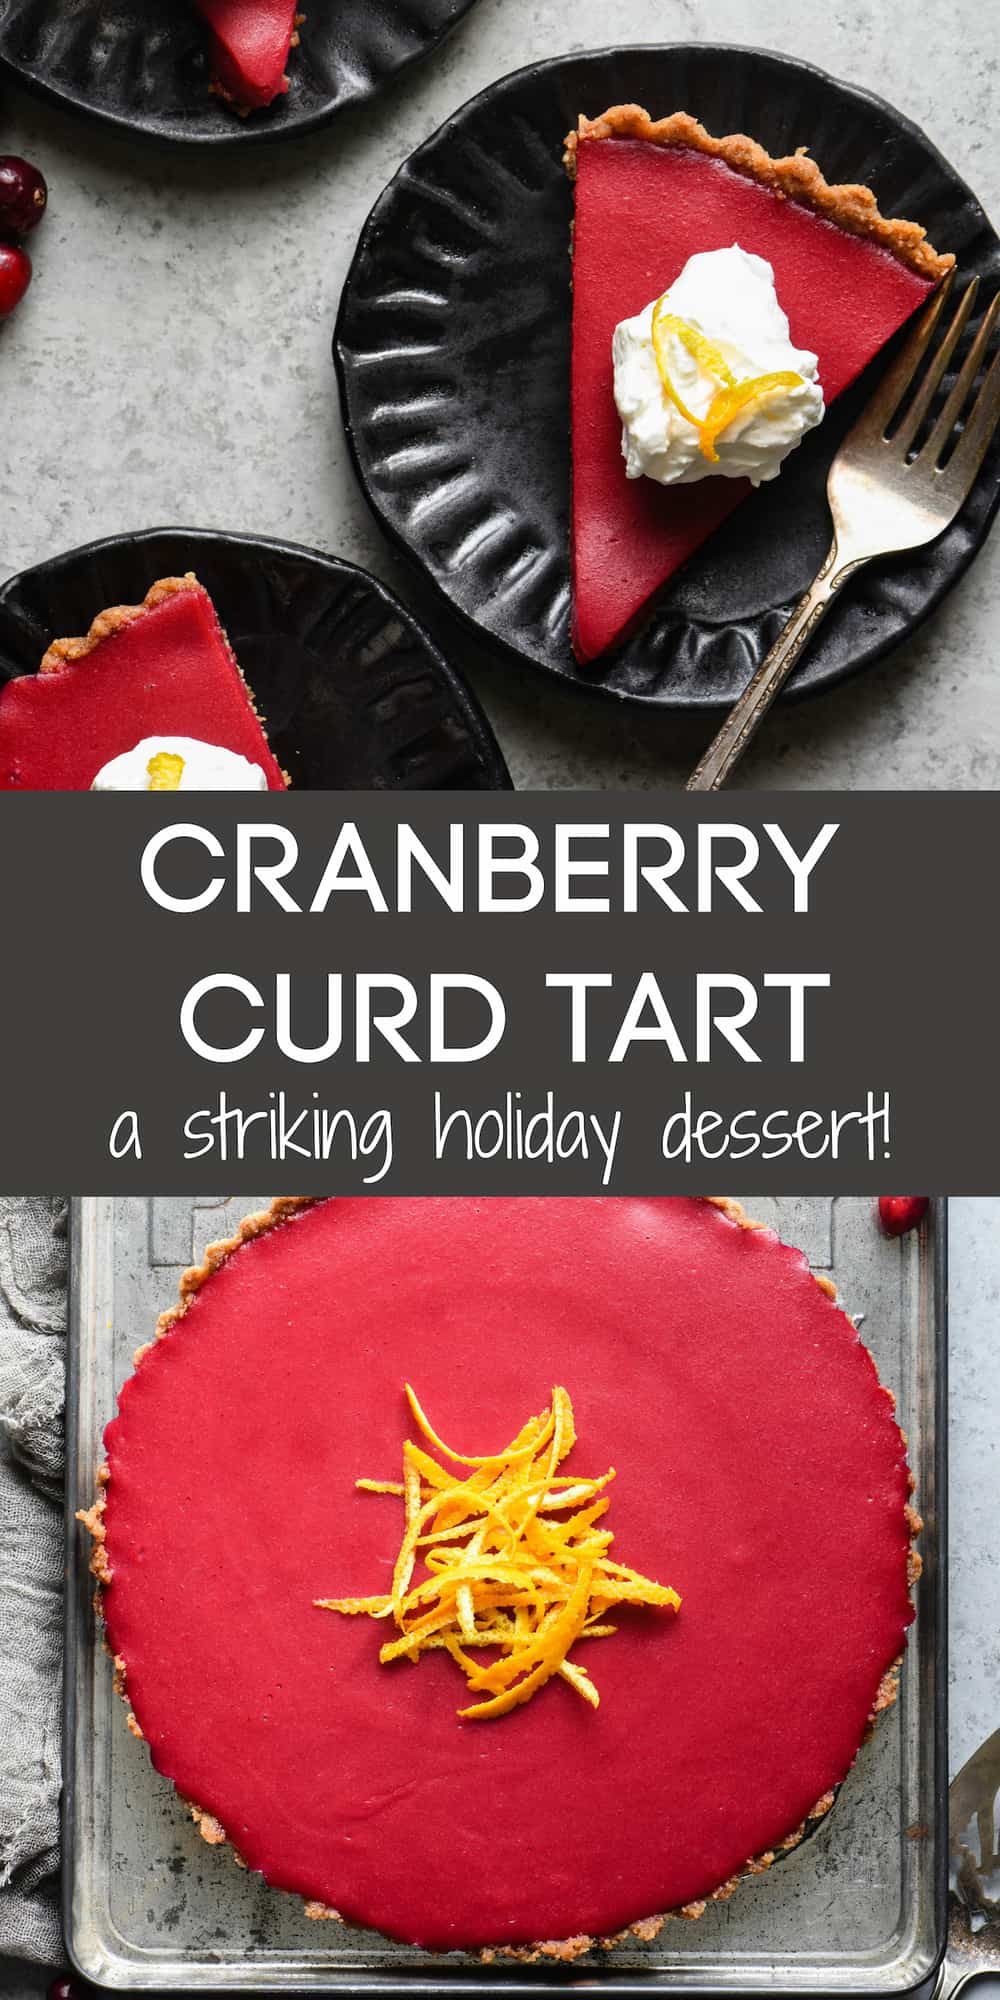 Collage of images of whole tart and cut slices, with overlay: CRANBERRY CURD TART a striking holiday dessert!